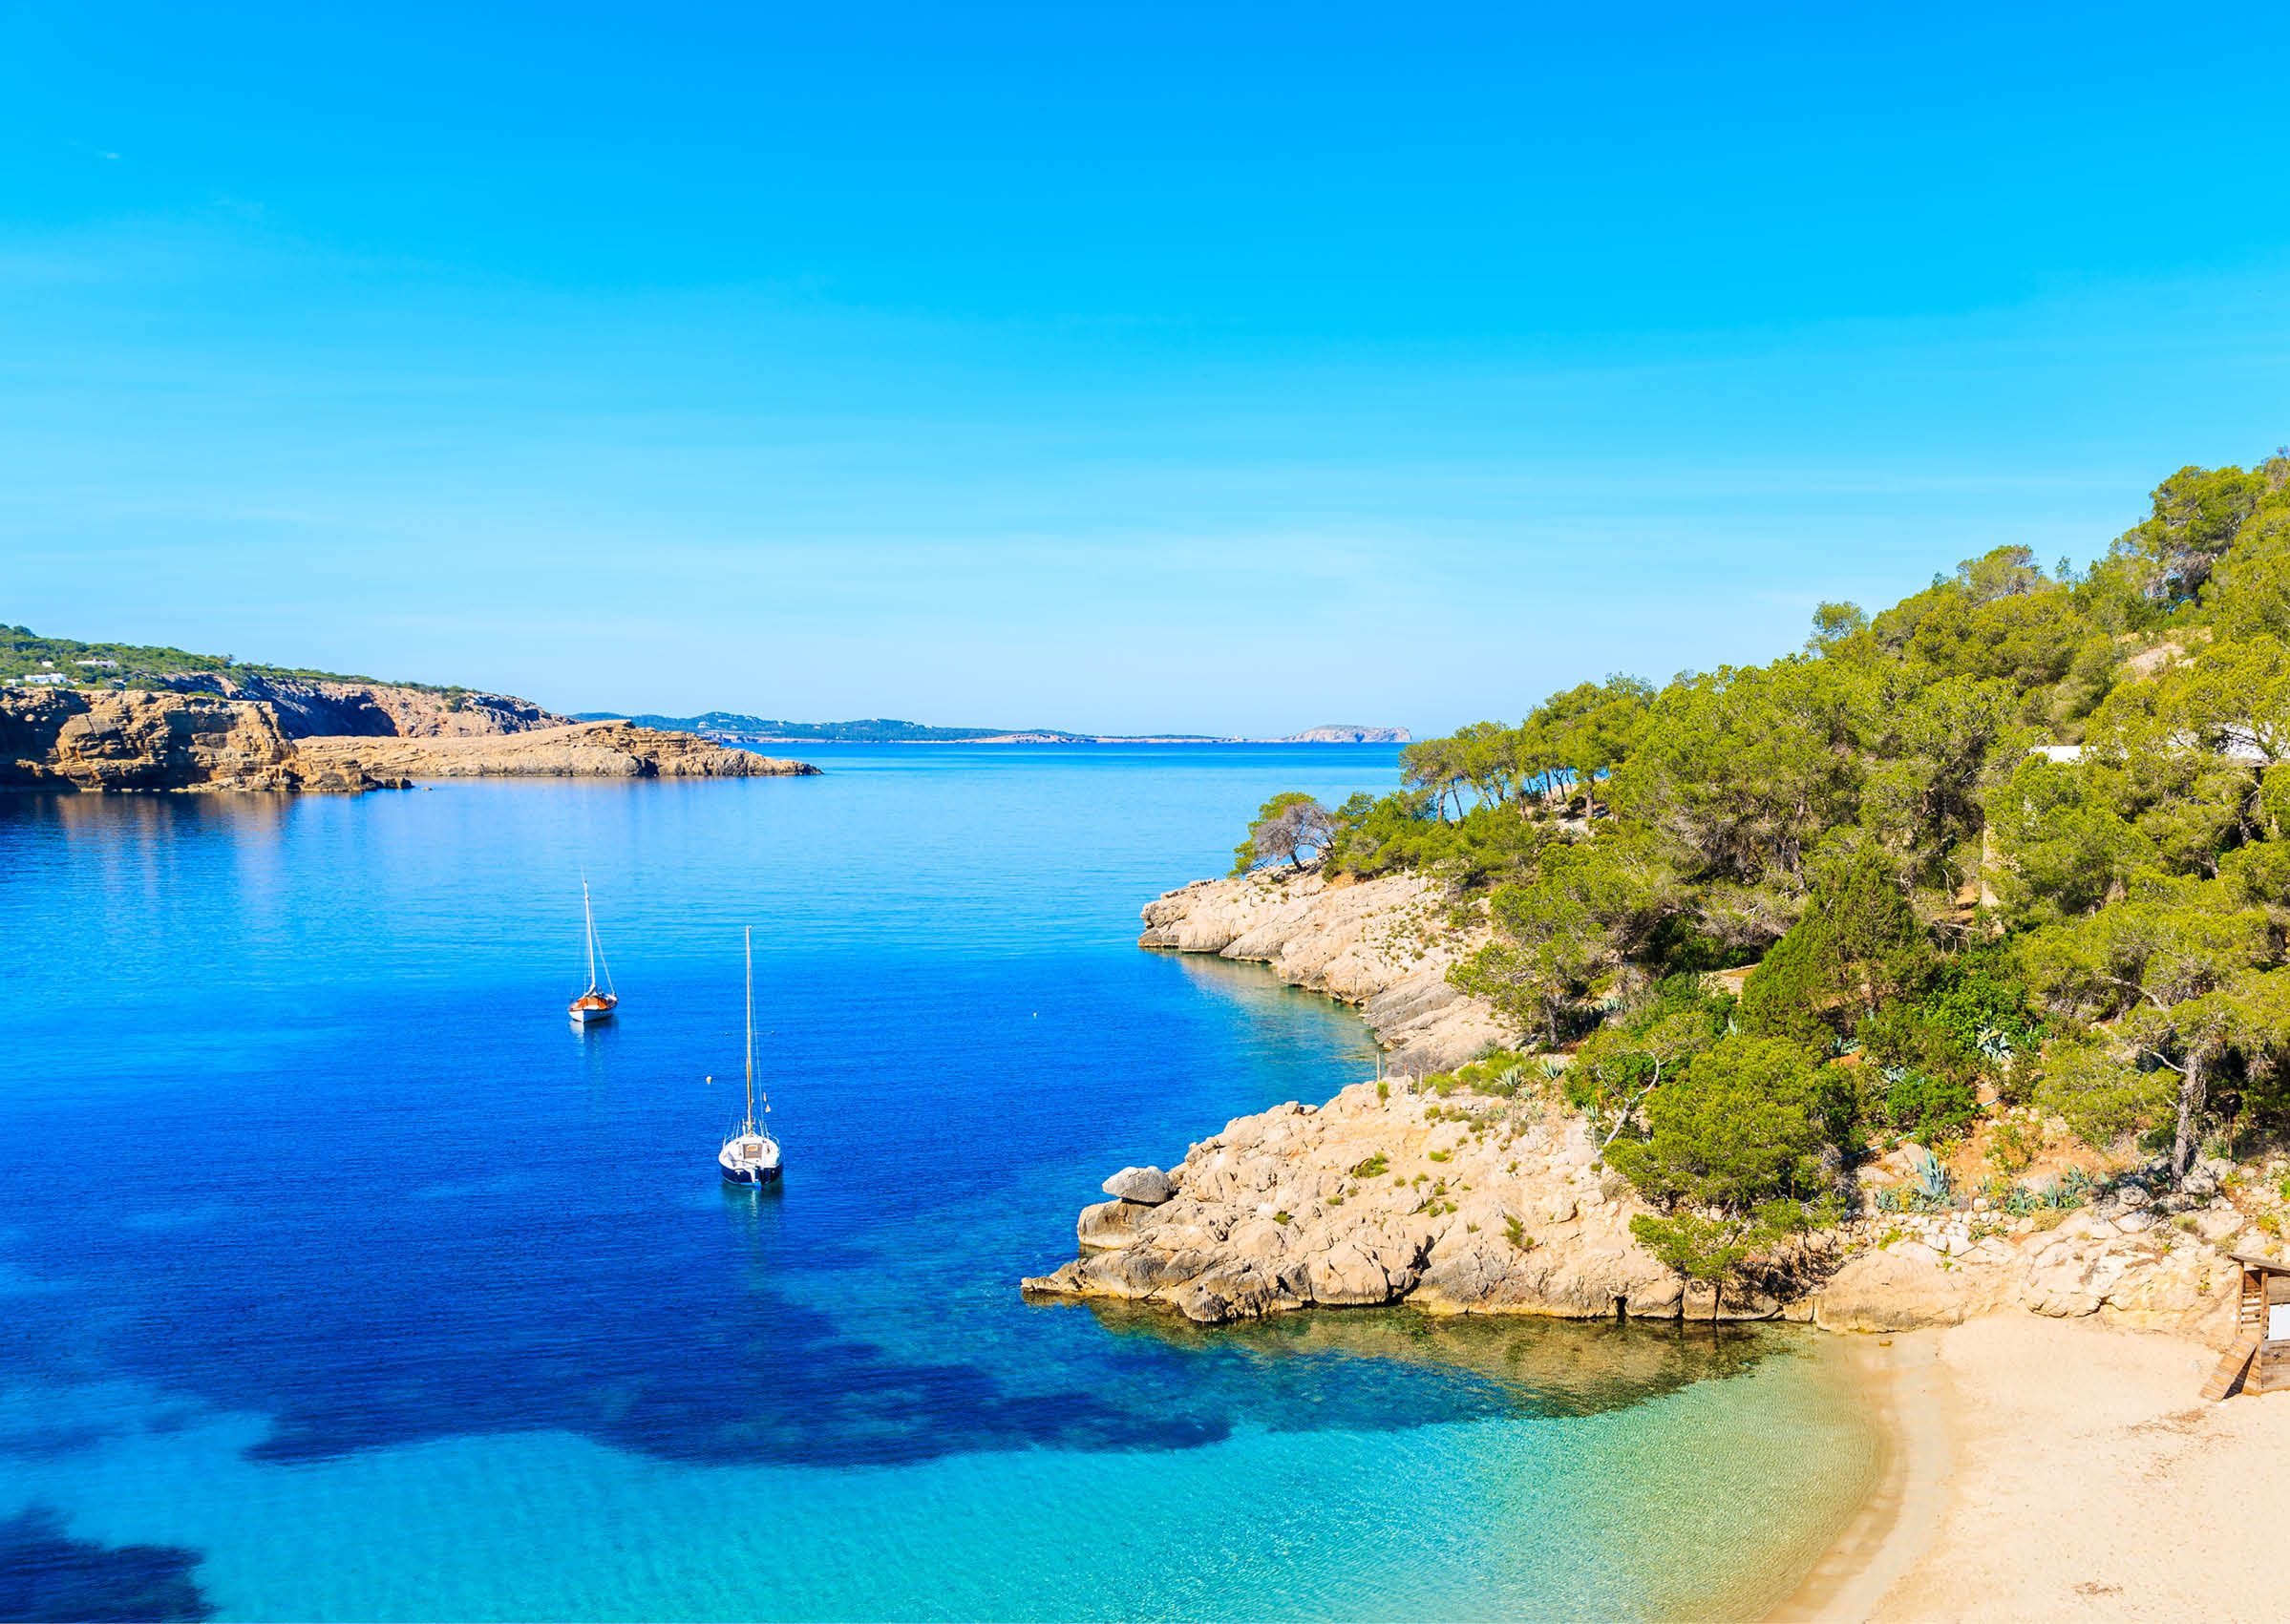 View of beautiful beach in Cala Salada famous for its azure crystal clear sea water, Ibiza island, Spain